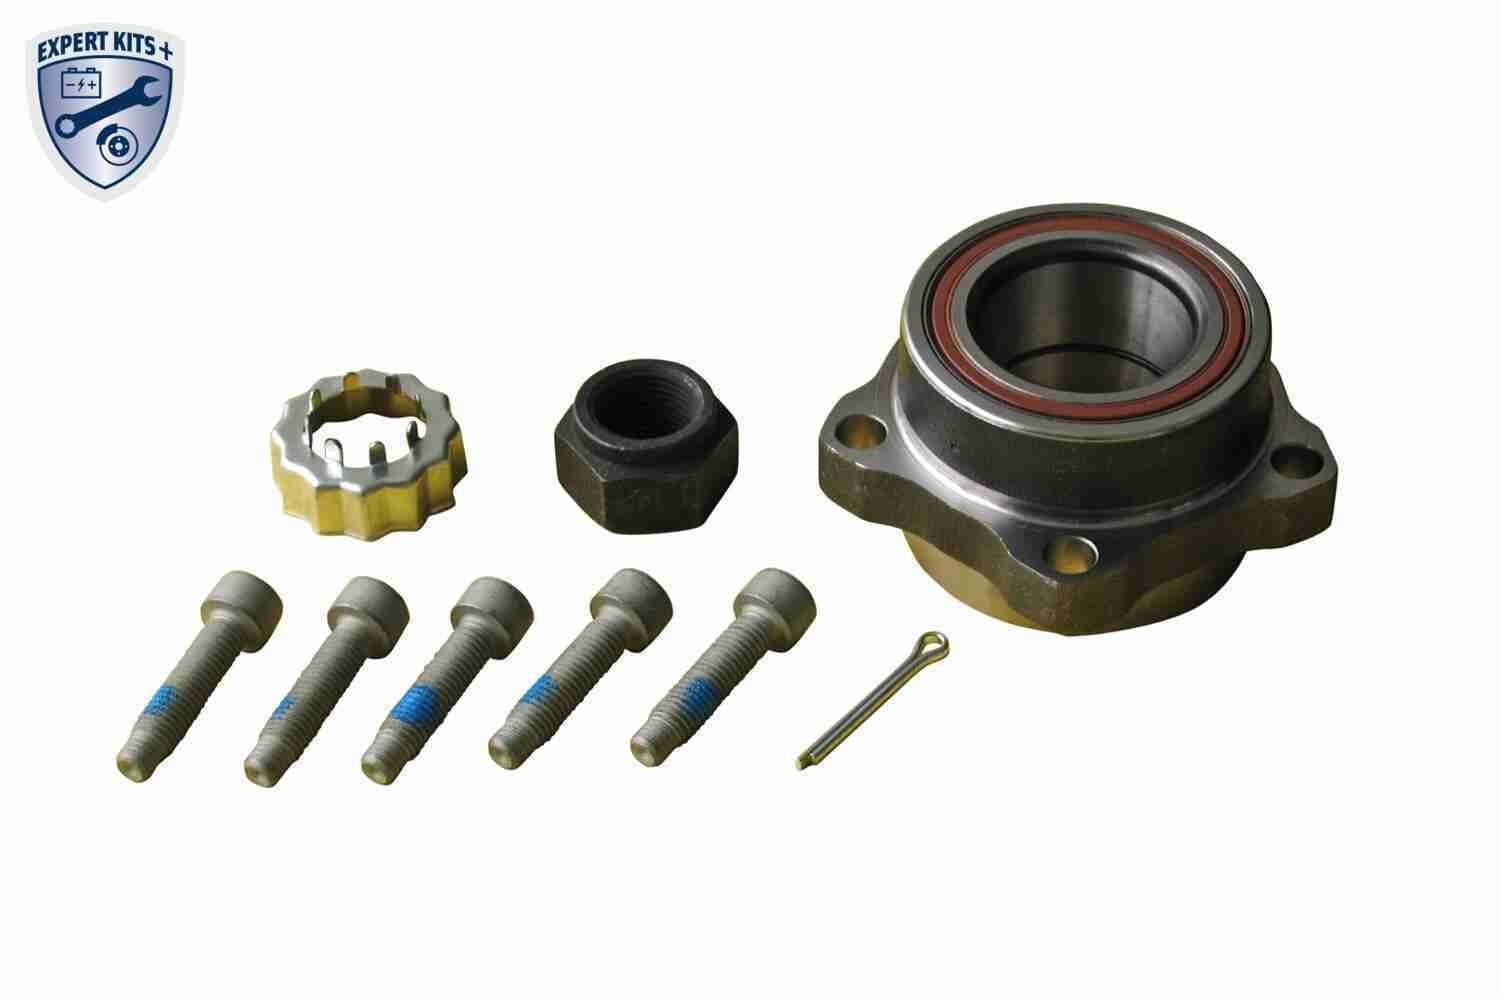 VAICO V25-0361 Wheel bearing kit Front Axle, with attachment material, EXPERT KITS +, with integrated magnetic sensor ring, 110 mm